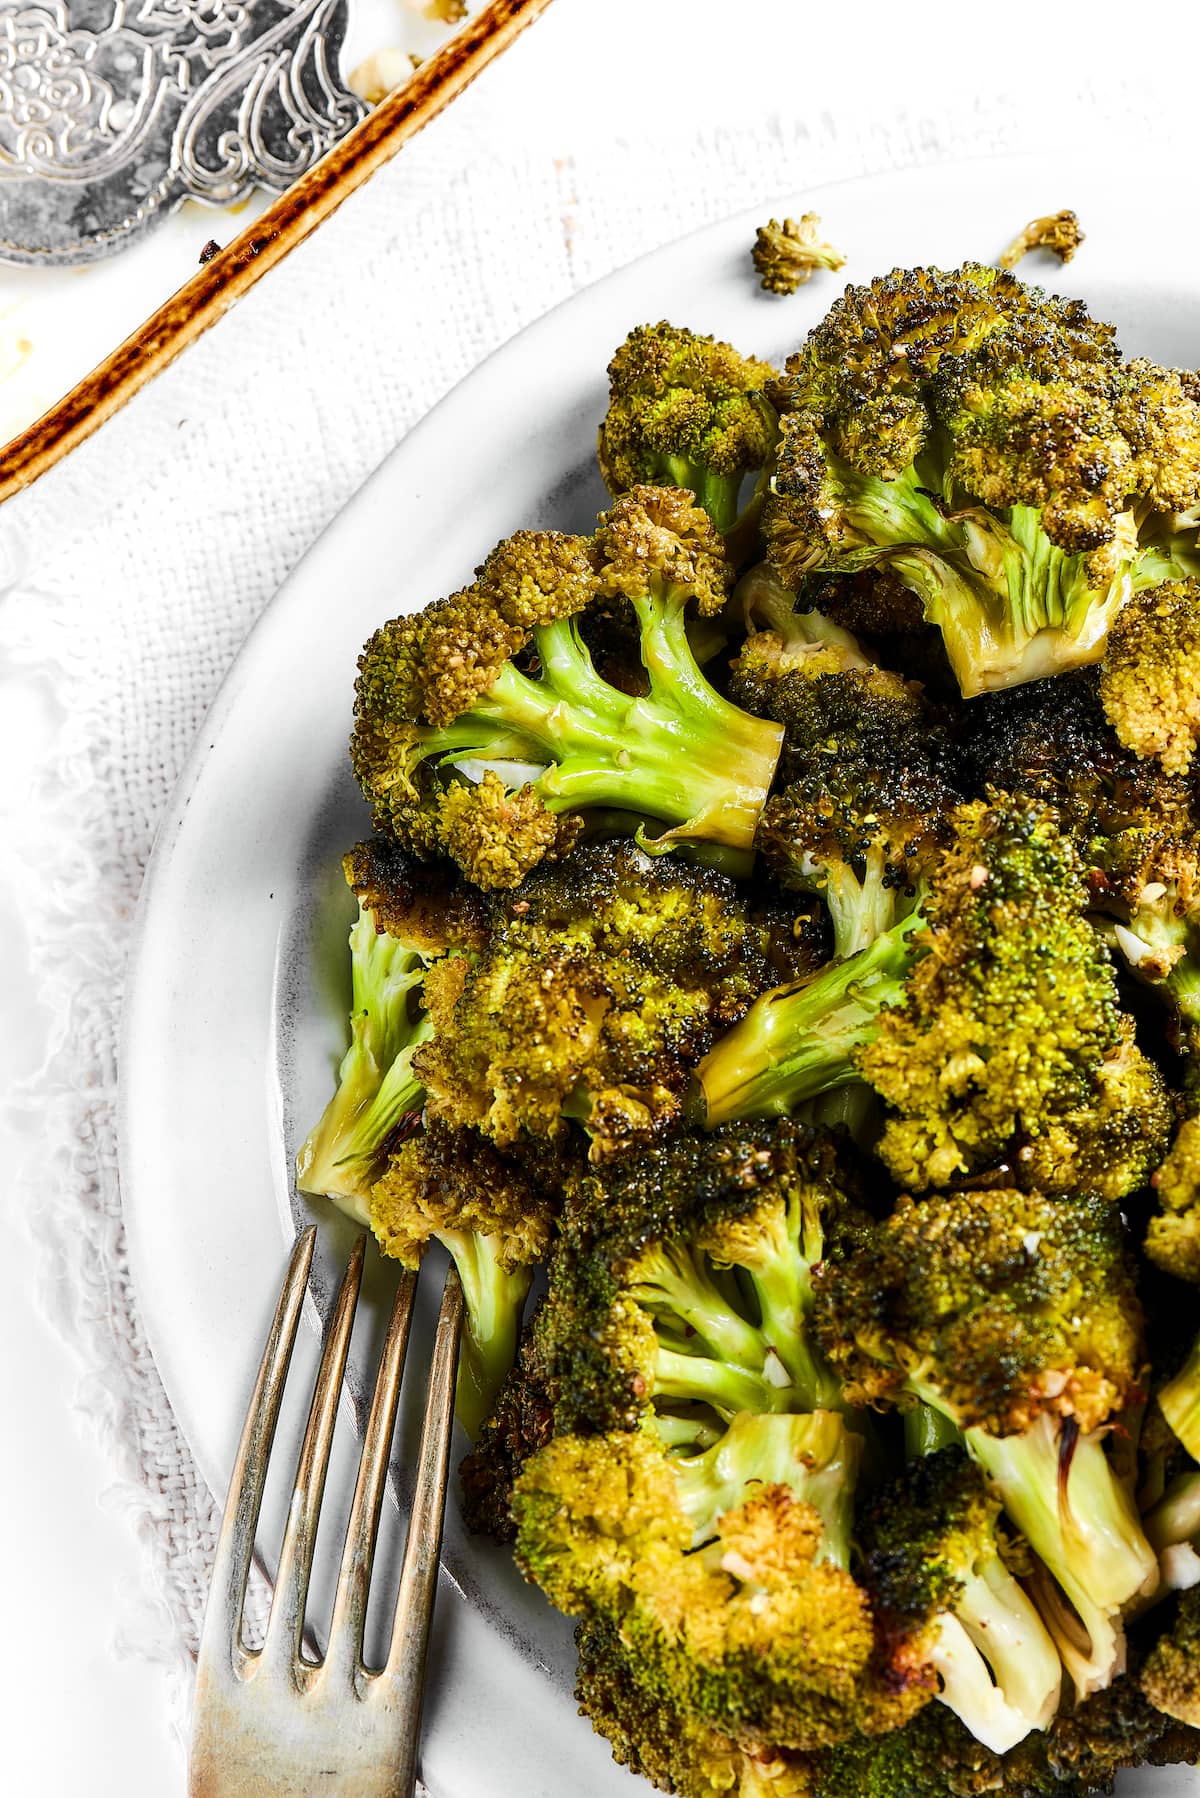 How to Blanch Broccoli (super quick, easy!)